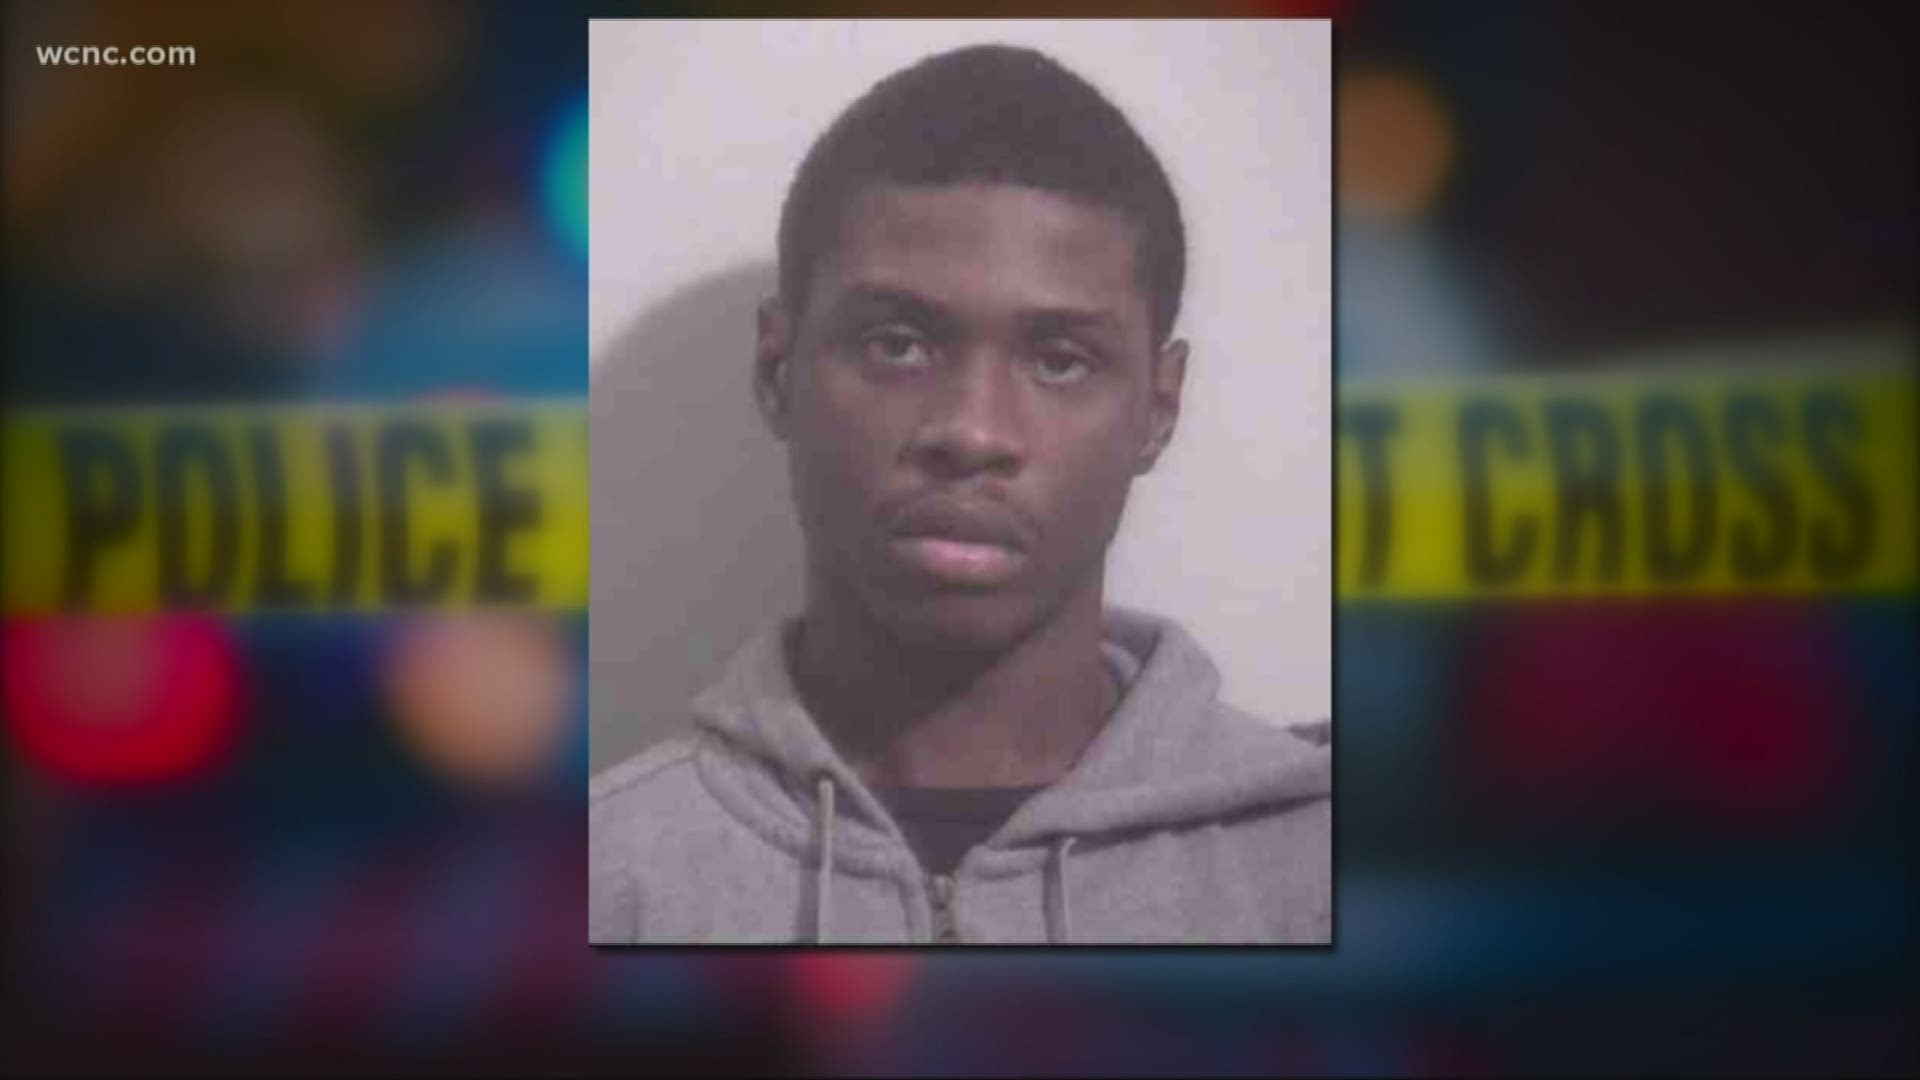 An 18-year-old is behind bars, charged with one count of first-degree murder.